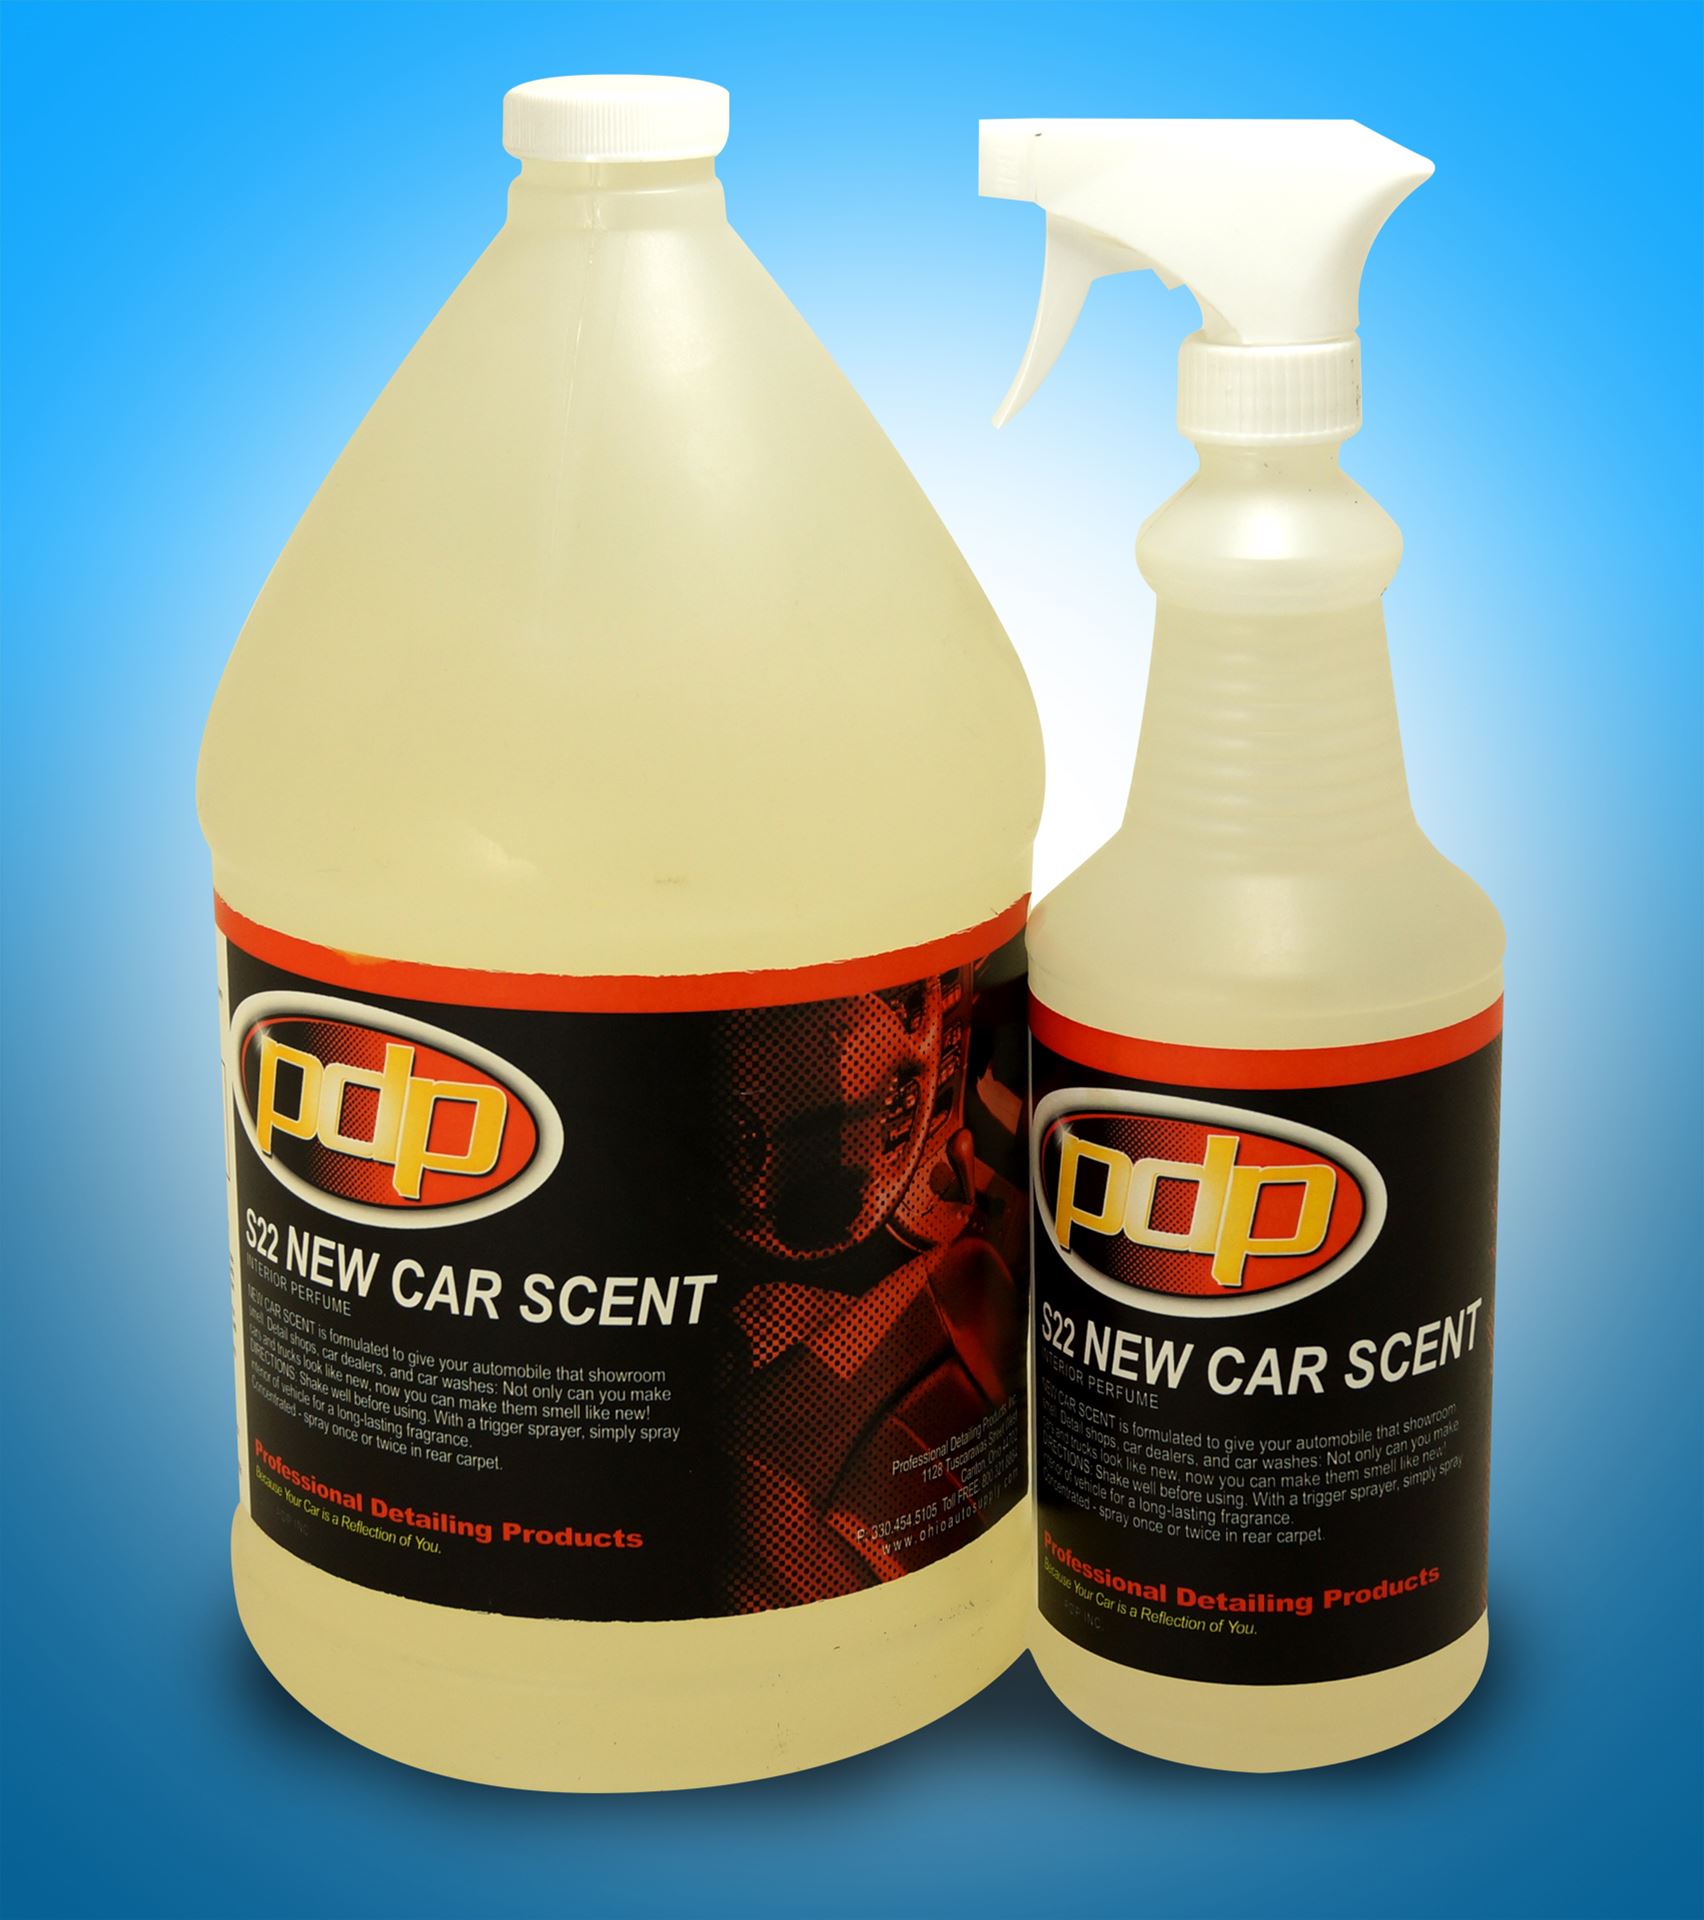 NEW CAR SCENT. Professional Detailing Products, Because Your Car is a  Reflection of You